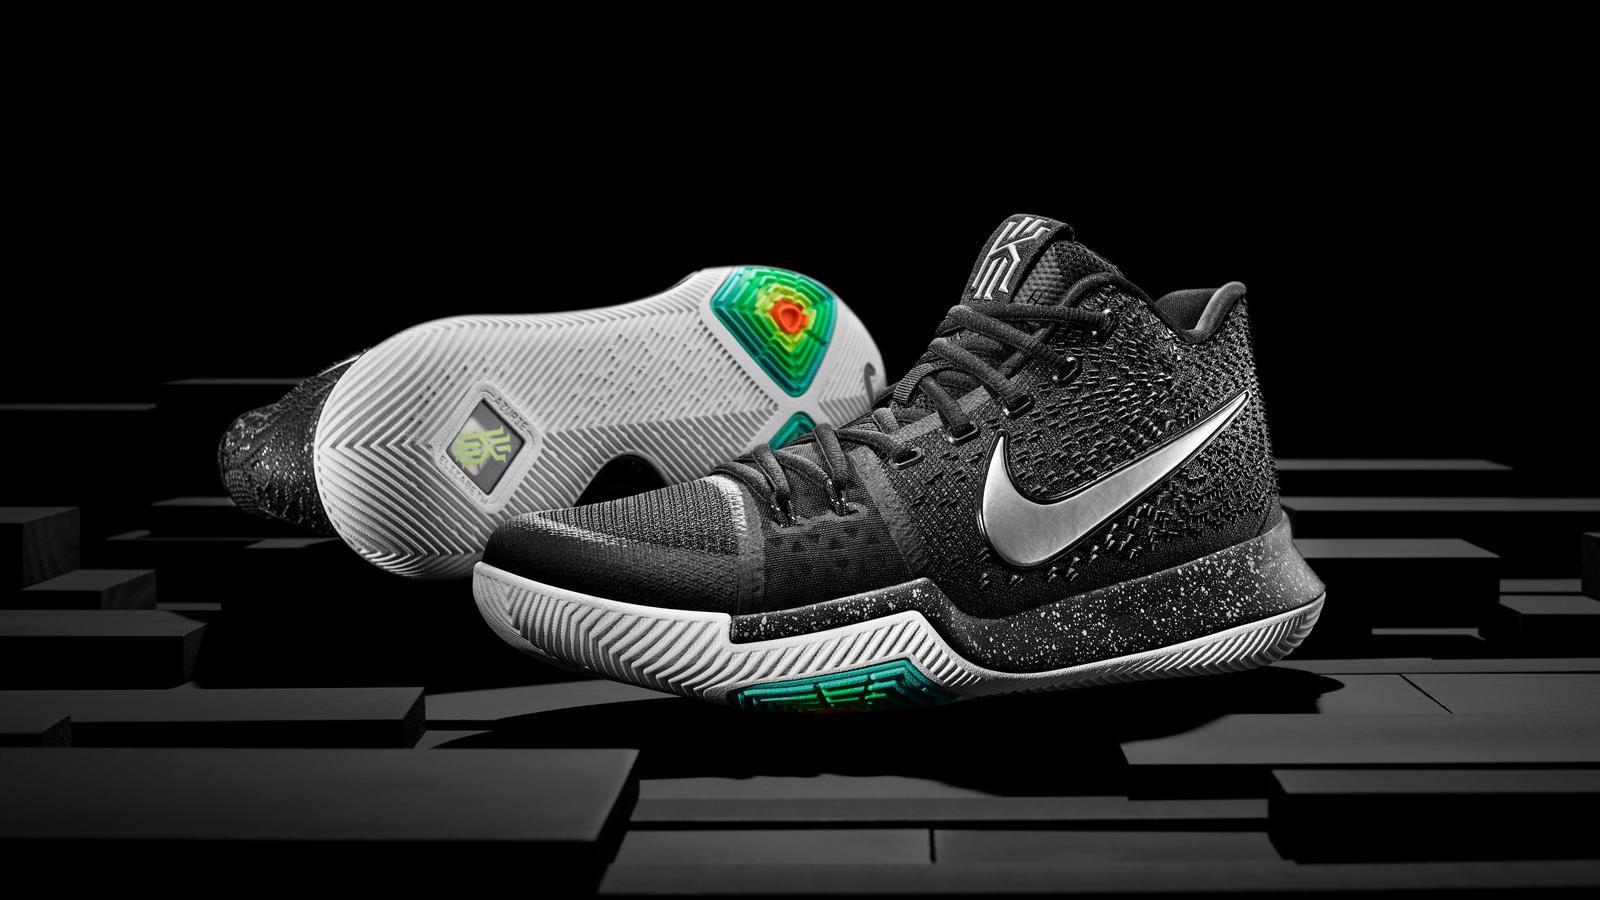 KYRIE 3 Built for Kyrie Irving's Prolific Game